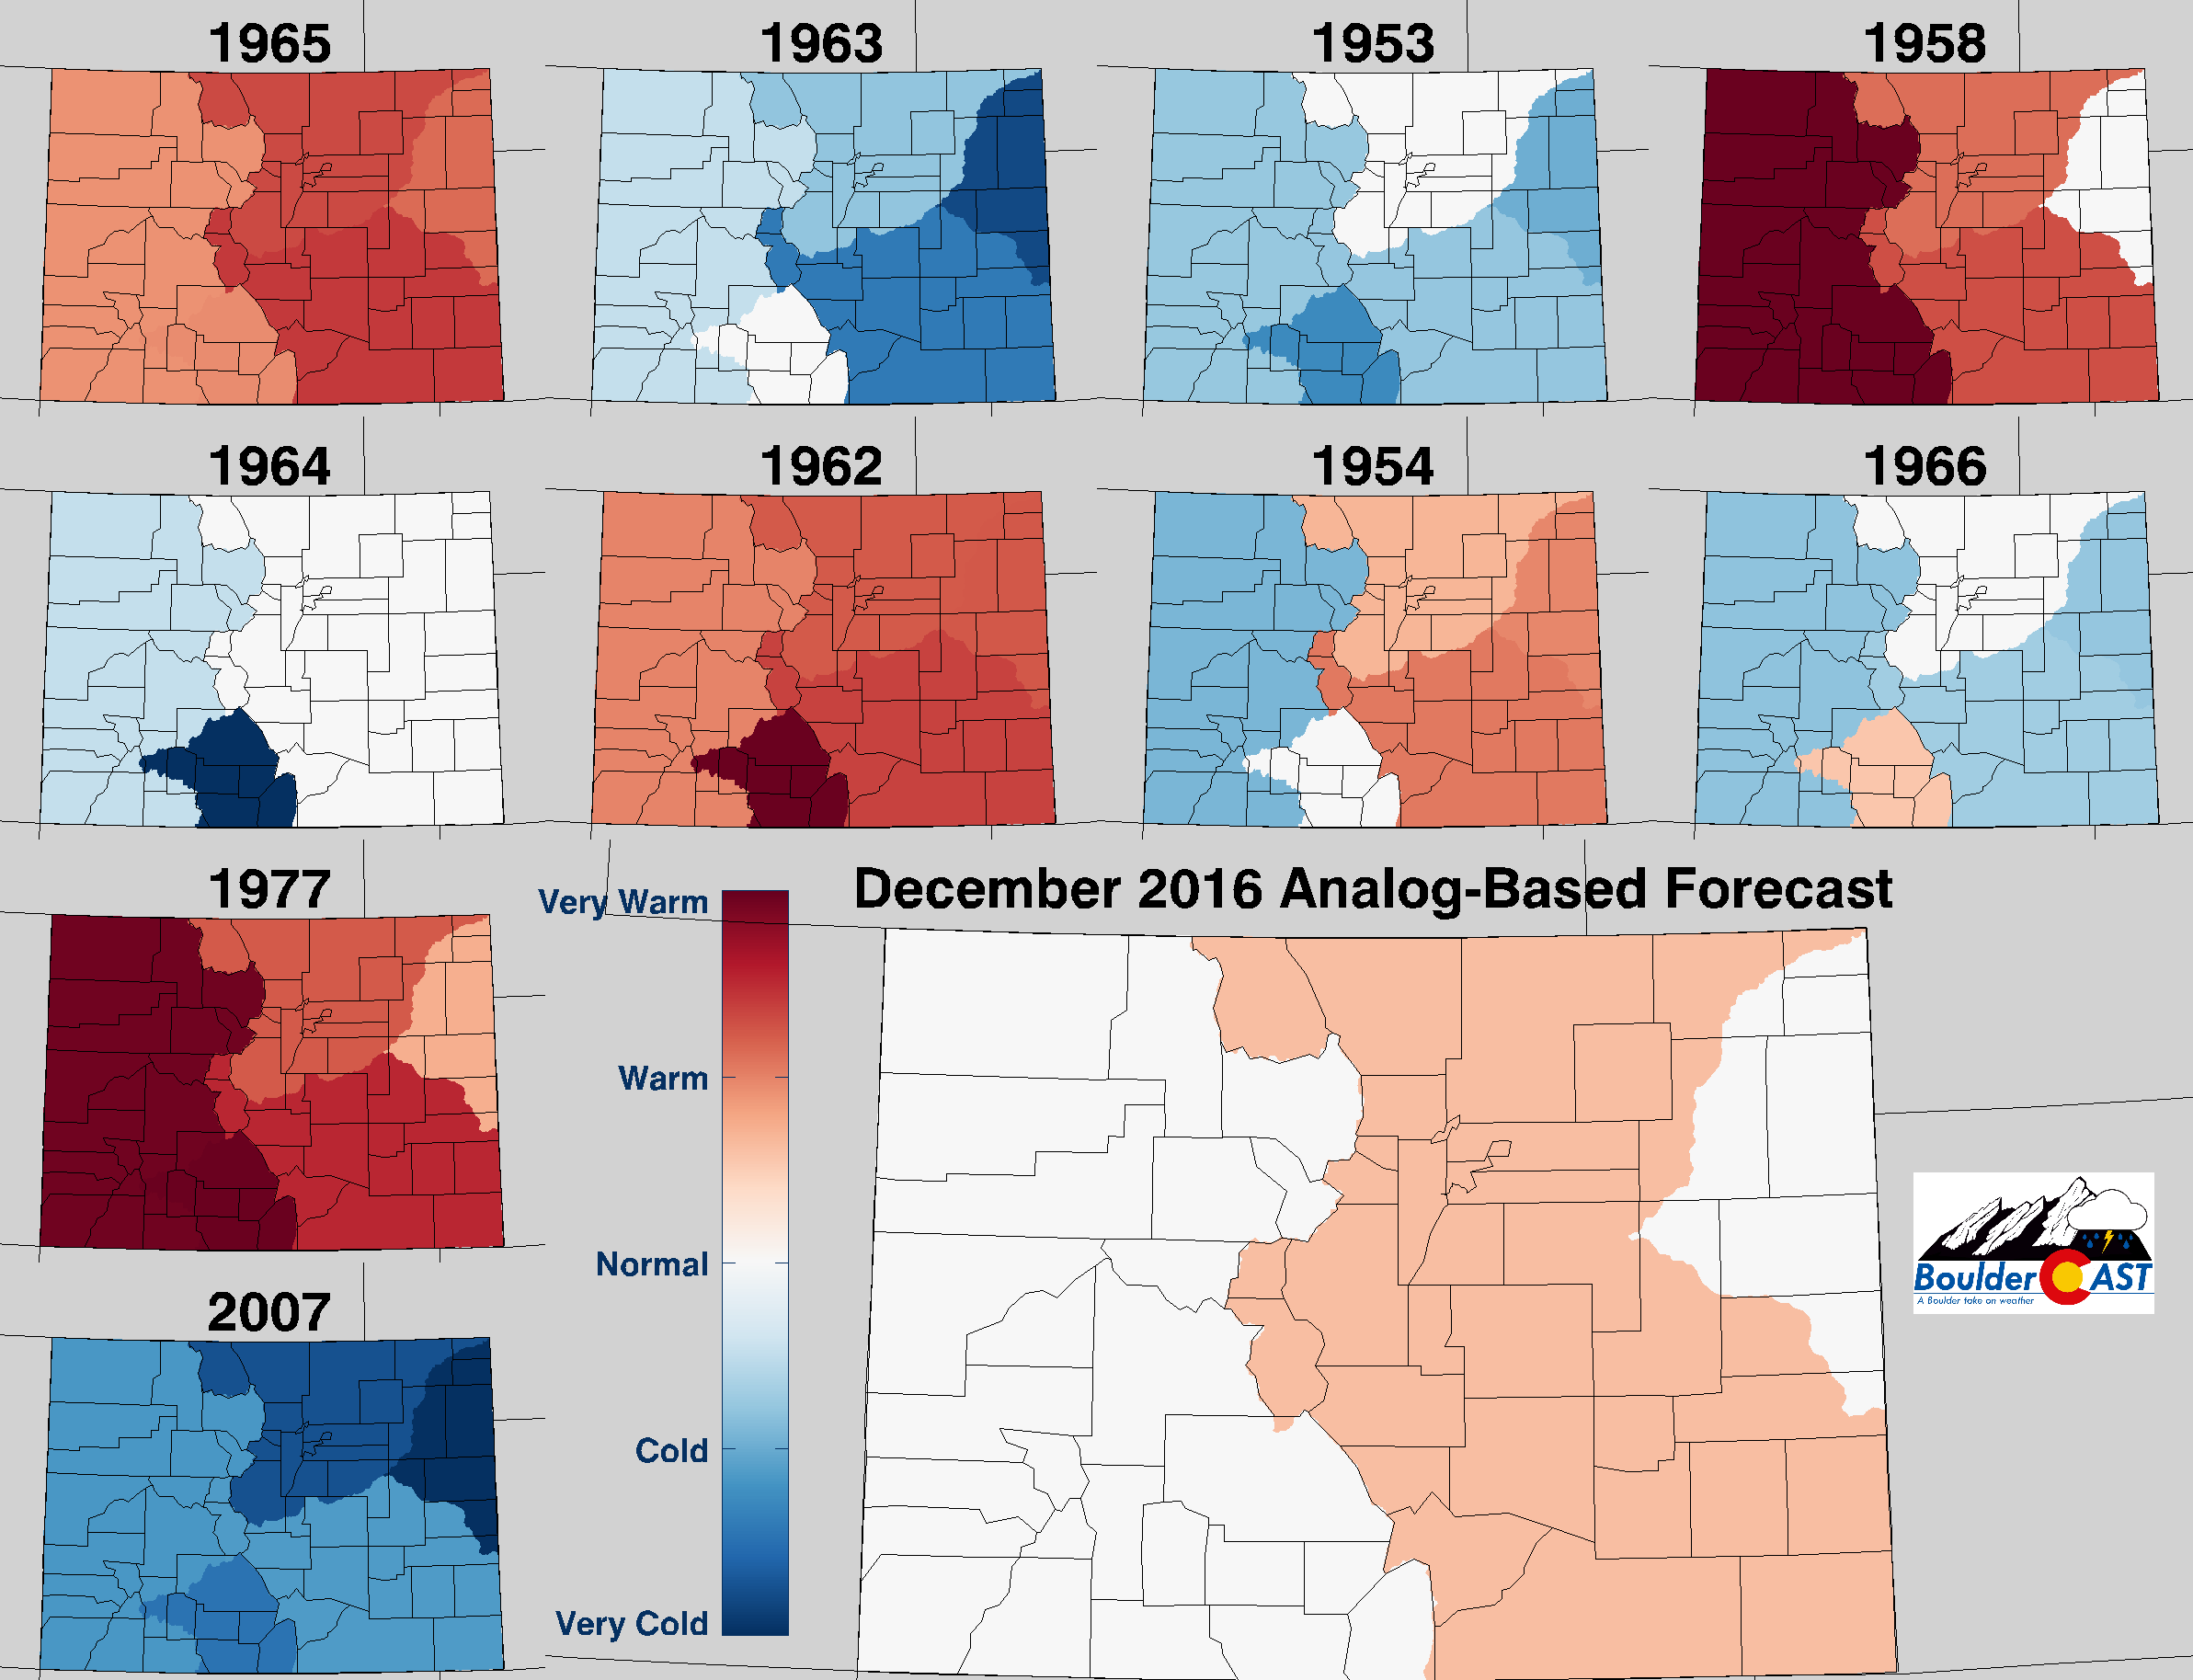 Top 10 Analogs to 2016 and how those years played for TEMPERATURE in Colorado during the month of December. The large map shows the analog-based weighted consensus forecast based on those 10 years.